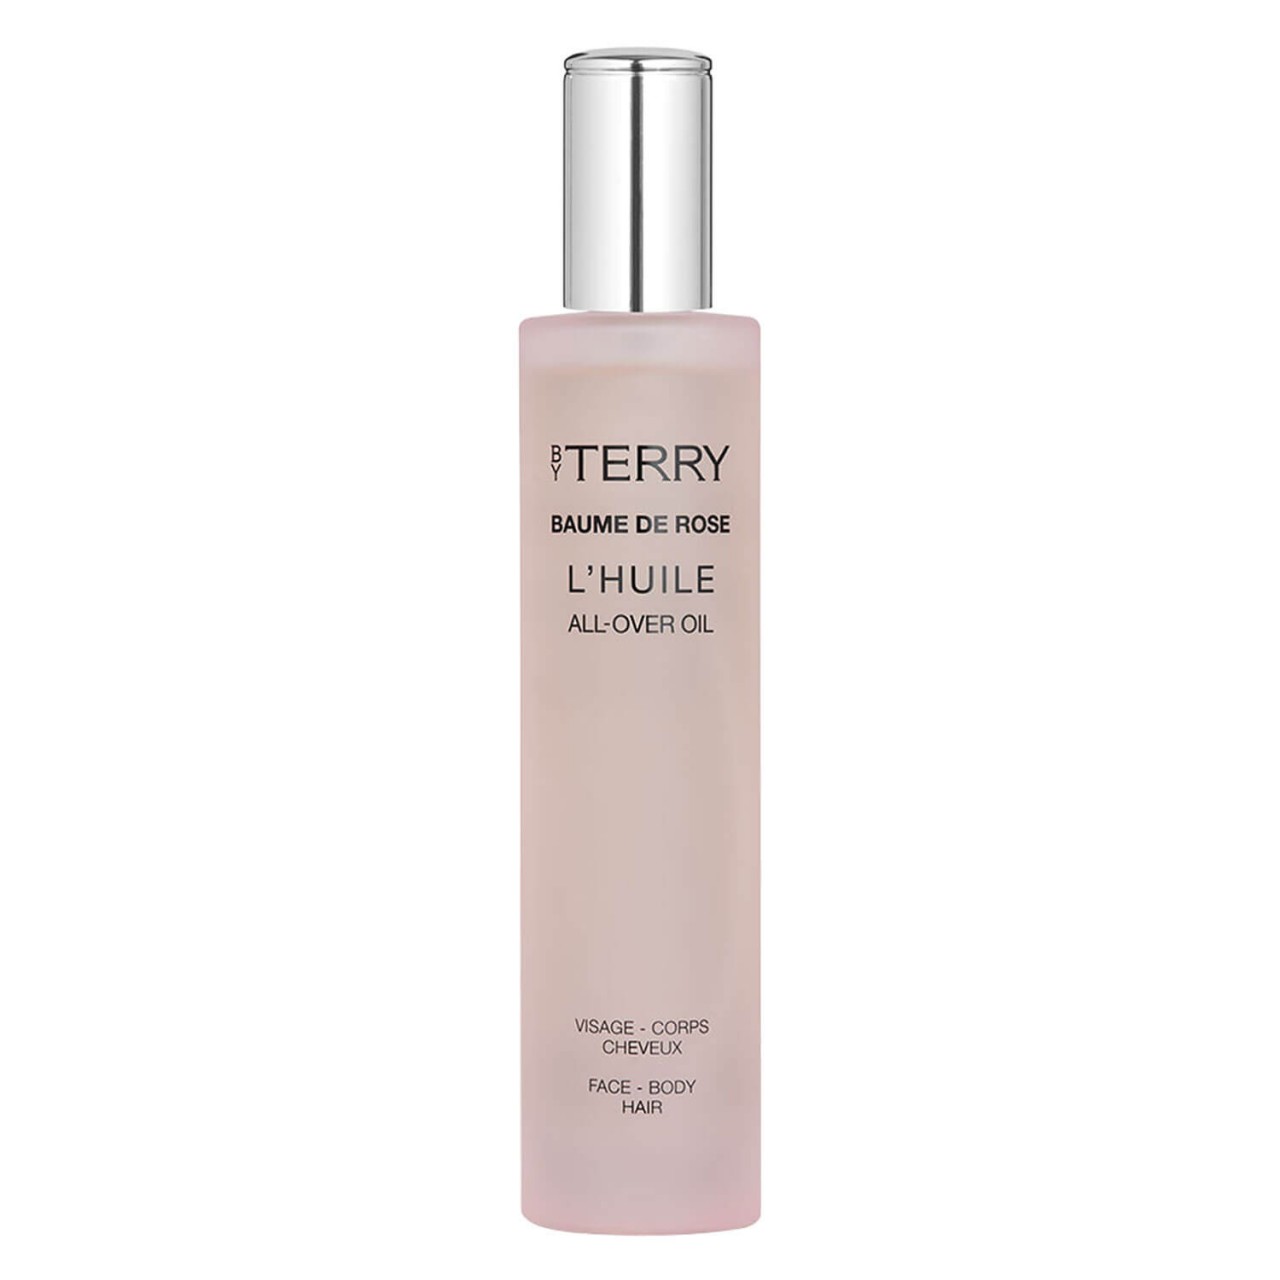 By Terry Care - Baume de Rose All-Over Oil von BY TERRY